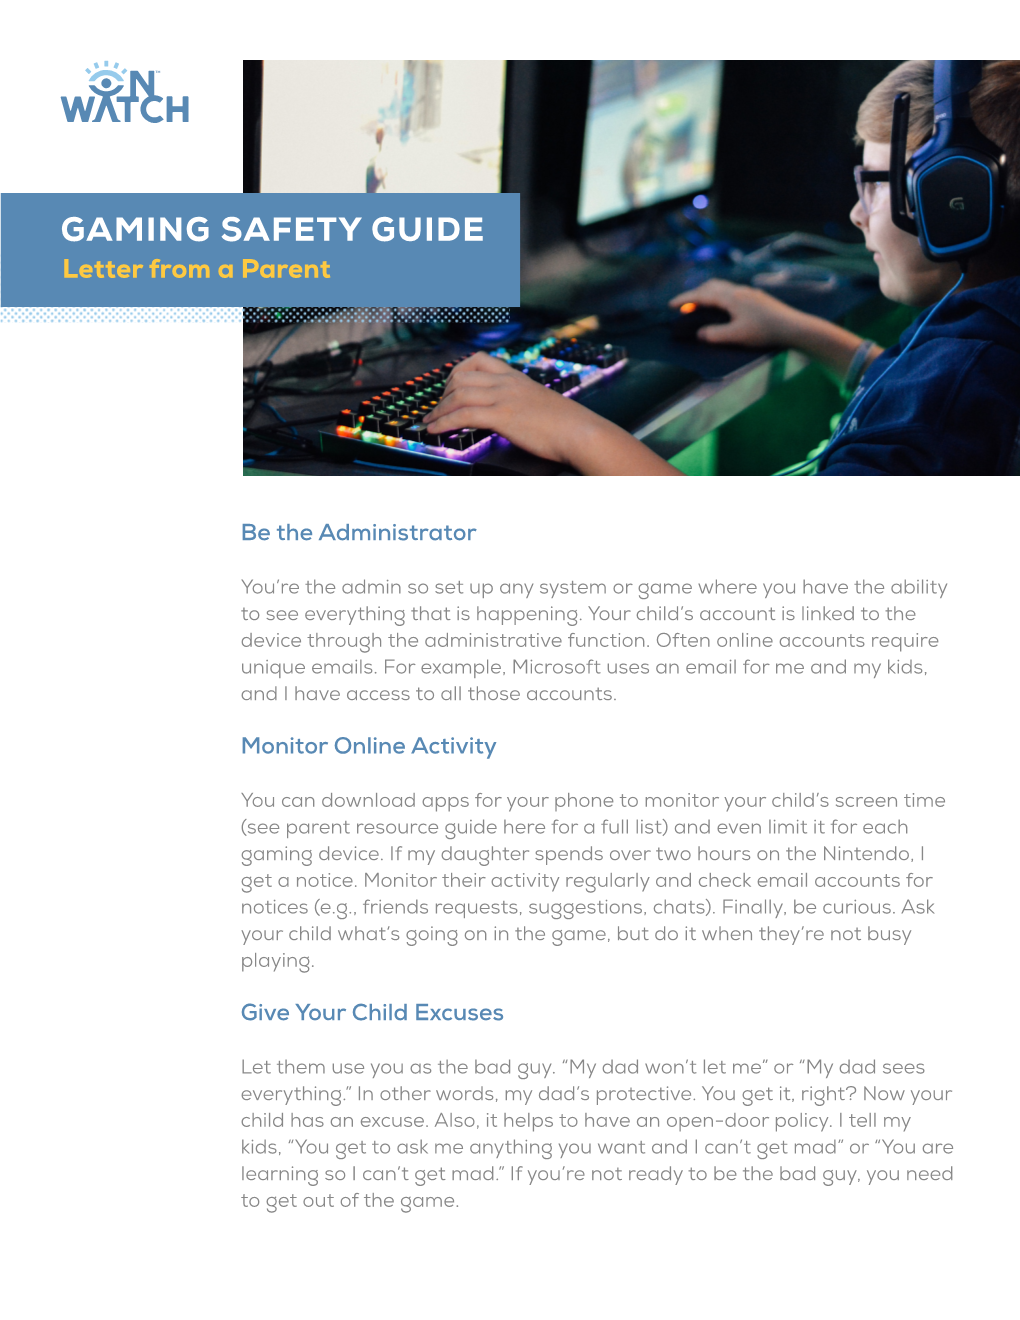 Onwatch's Gaming Safety Guide